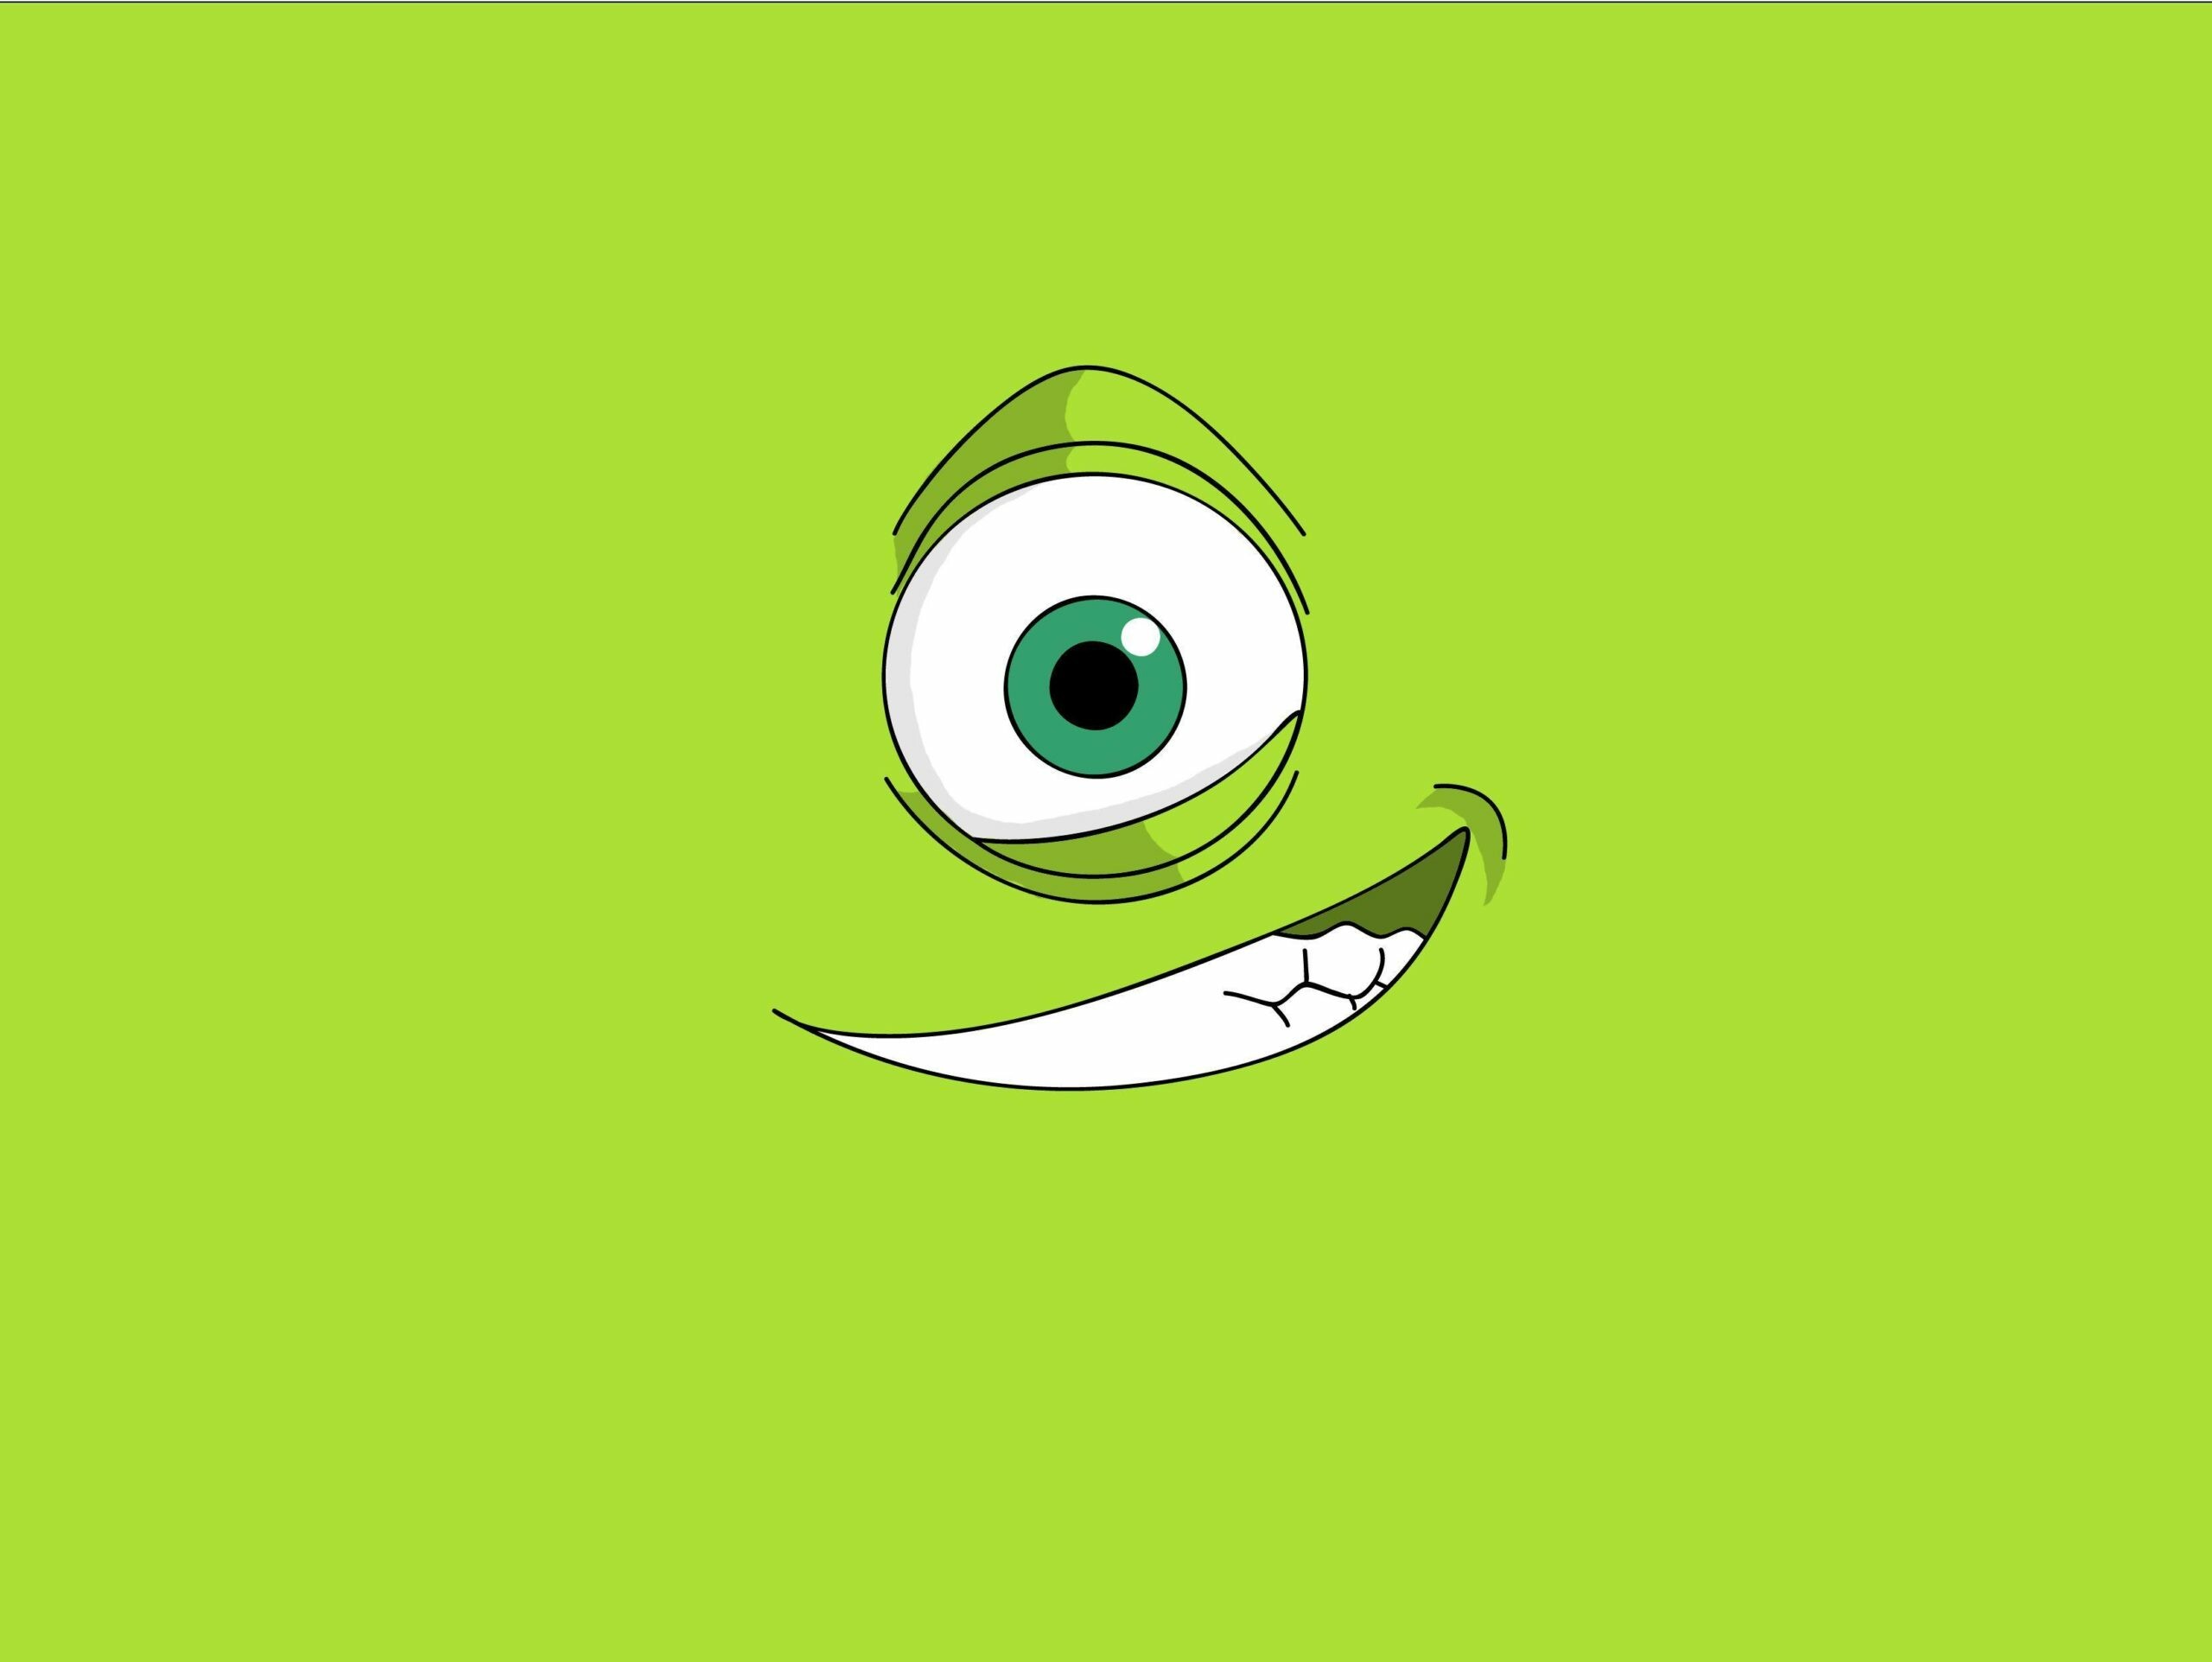 Monsters, Inc.: Michael "Mike" Wazowski, A green cyclops-like monster with a round body. 2560x1930 HD Wallpaper.